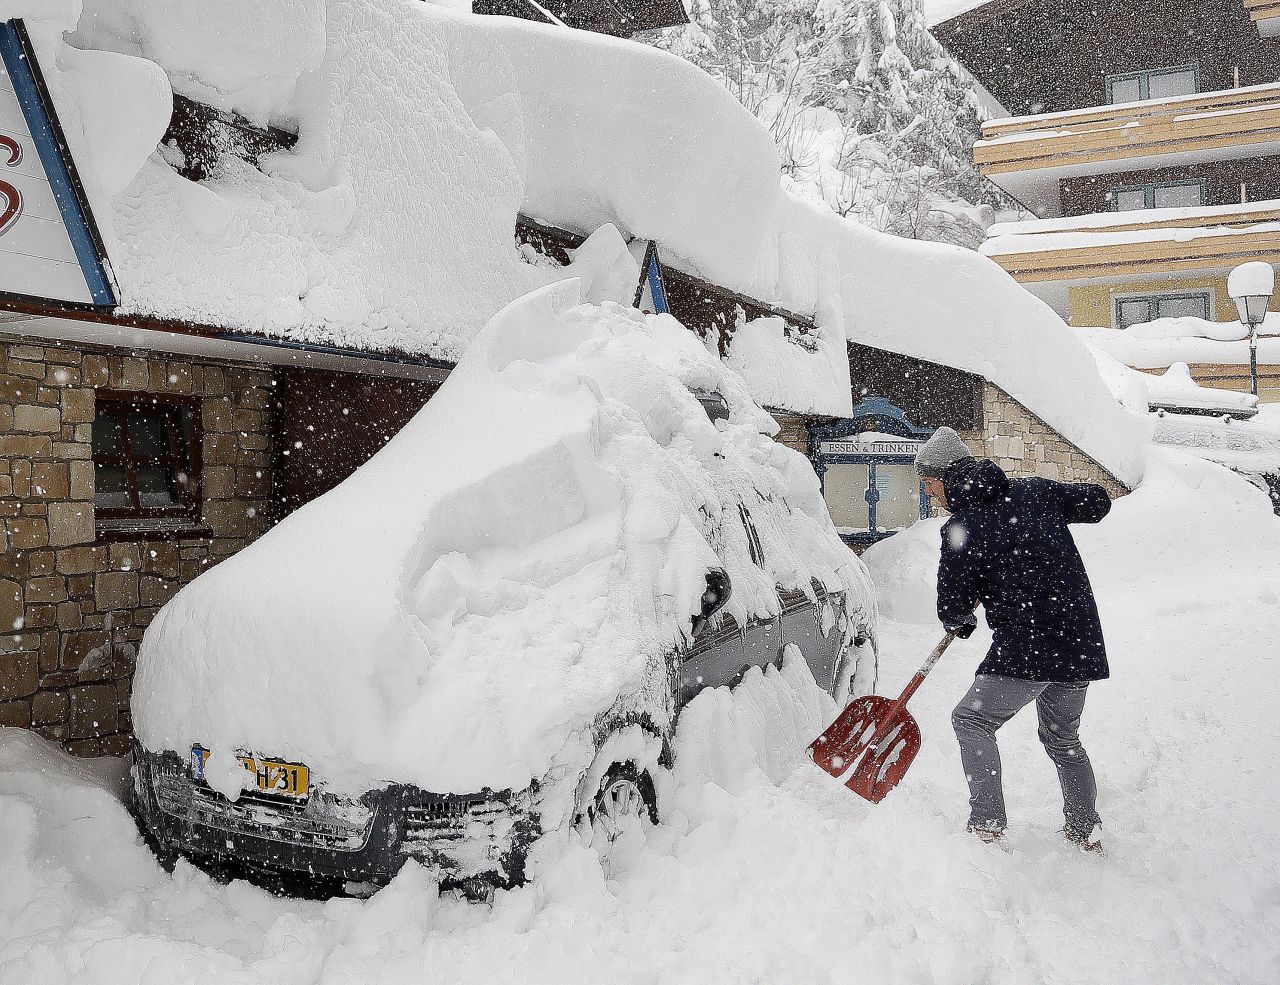 A tourist removes snow from a vehicle in Filzmoos, Austria, on Saturday, January 5.